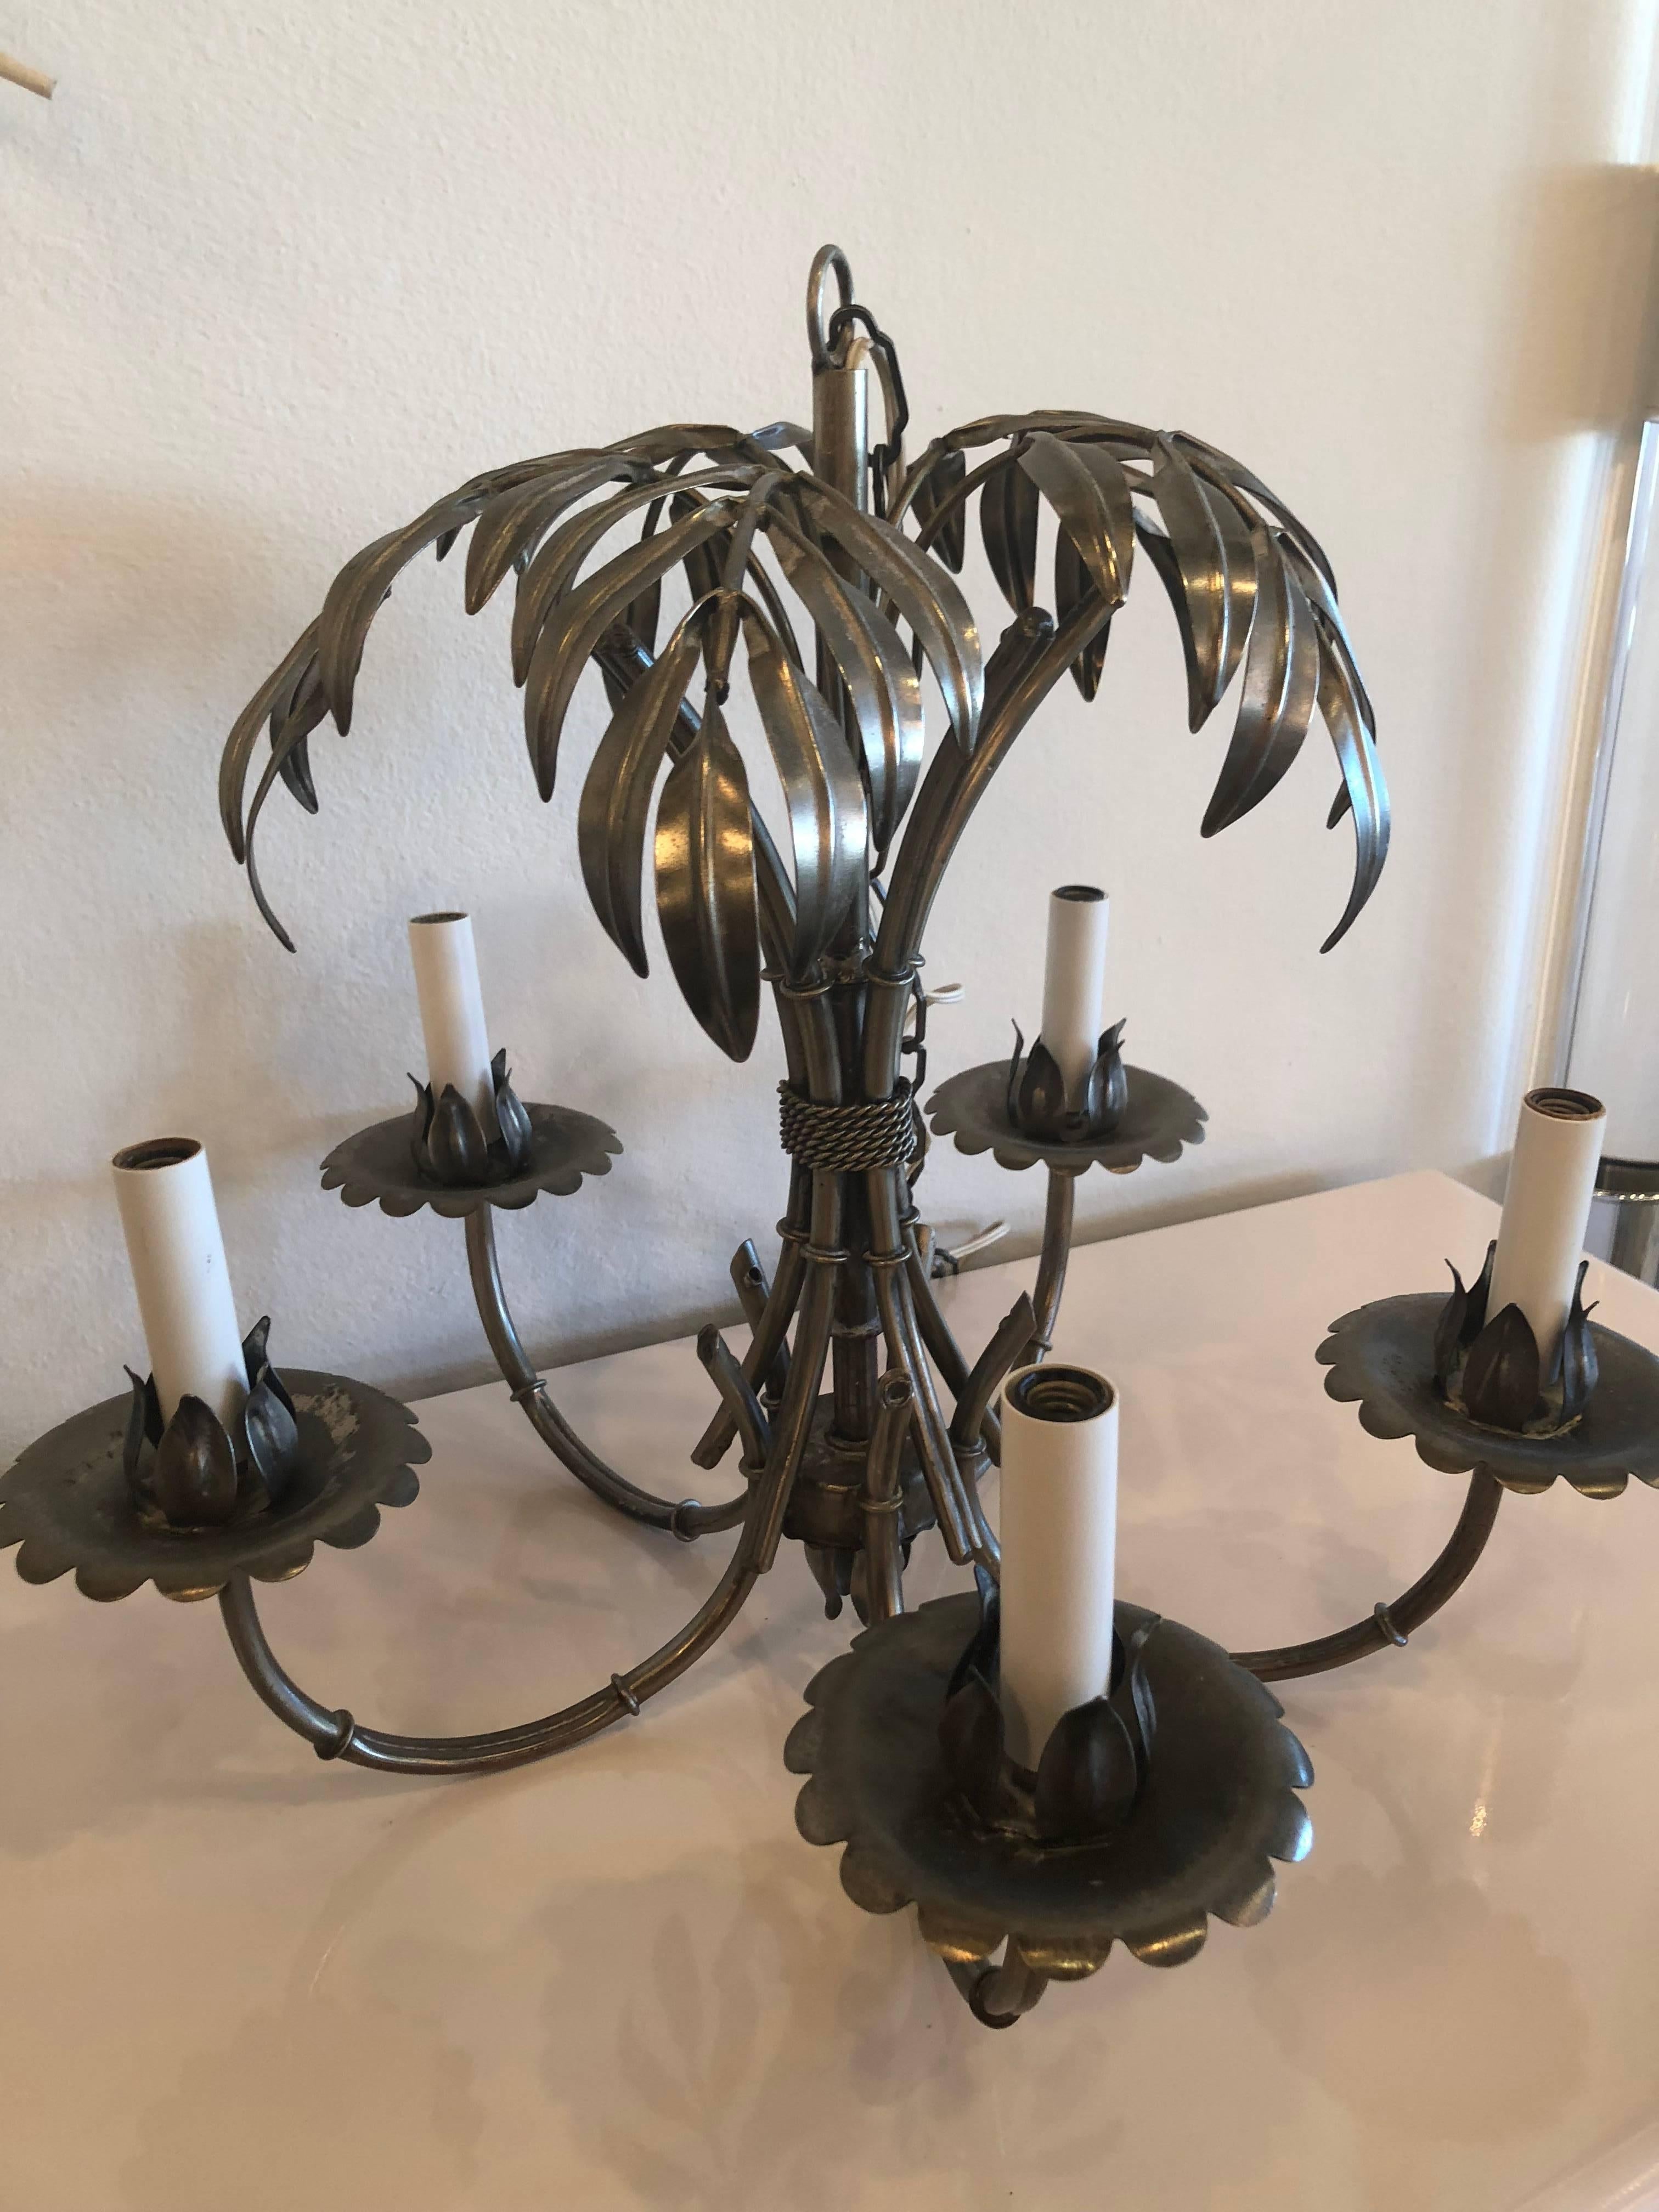 Vintage faux bamboo palm tree chandelier, silver metal.
Five-arm, silver chain included.